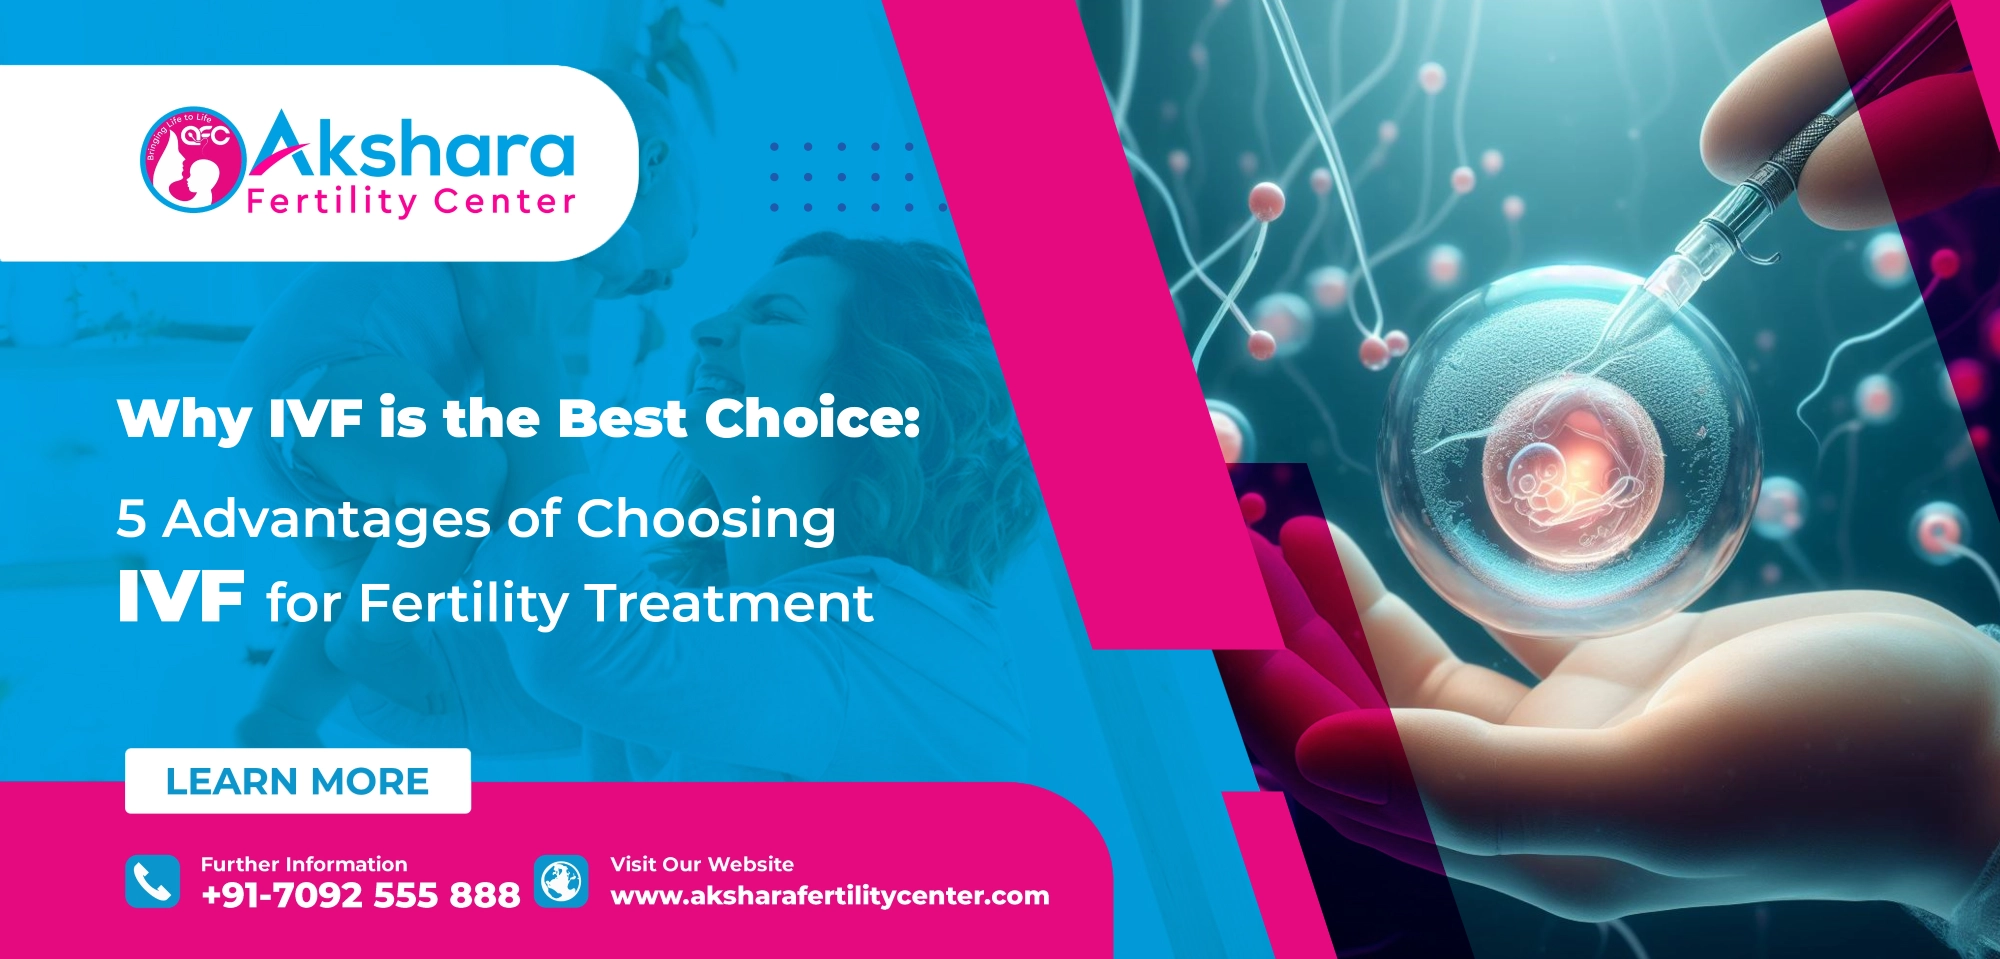 Why IVF is the Best Choice: 5 Advantages of Choosing IVF for Fertility Treatment